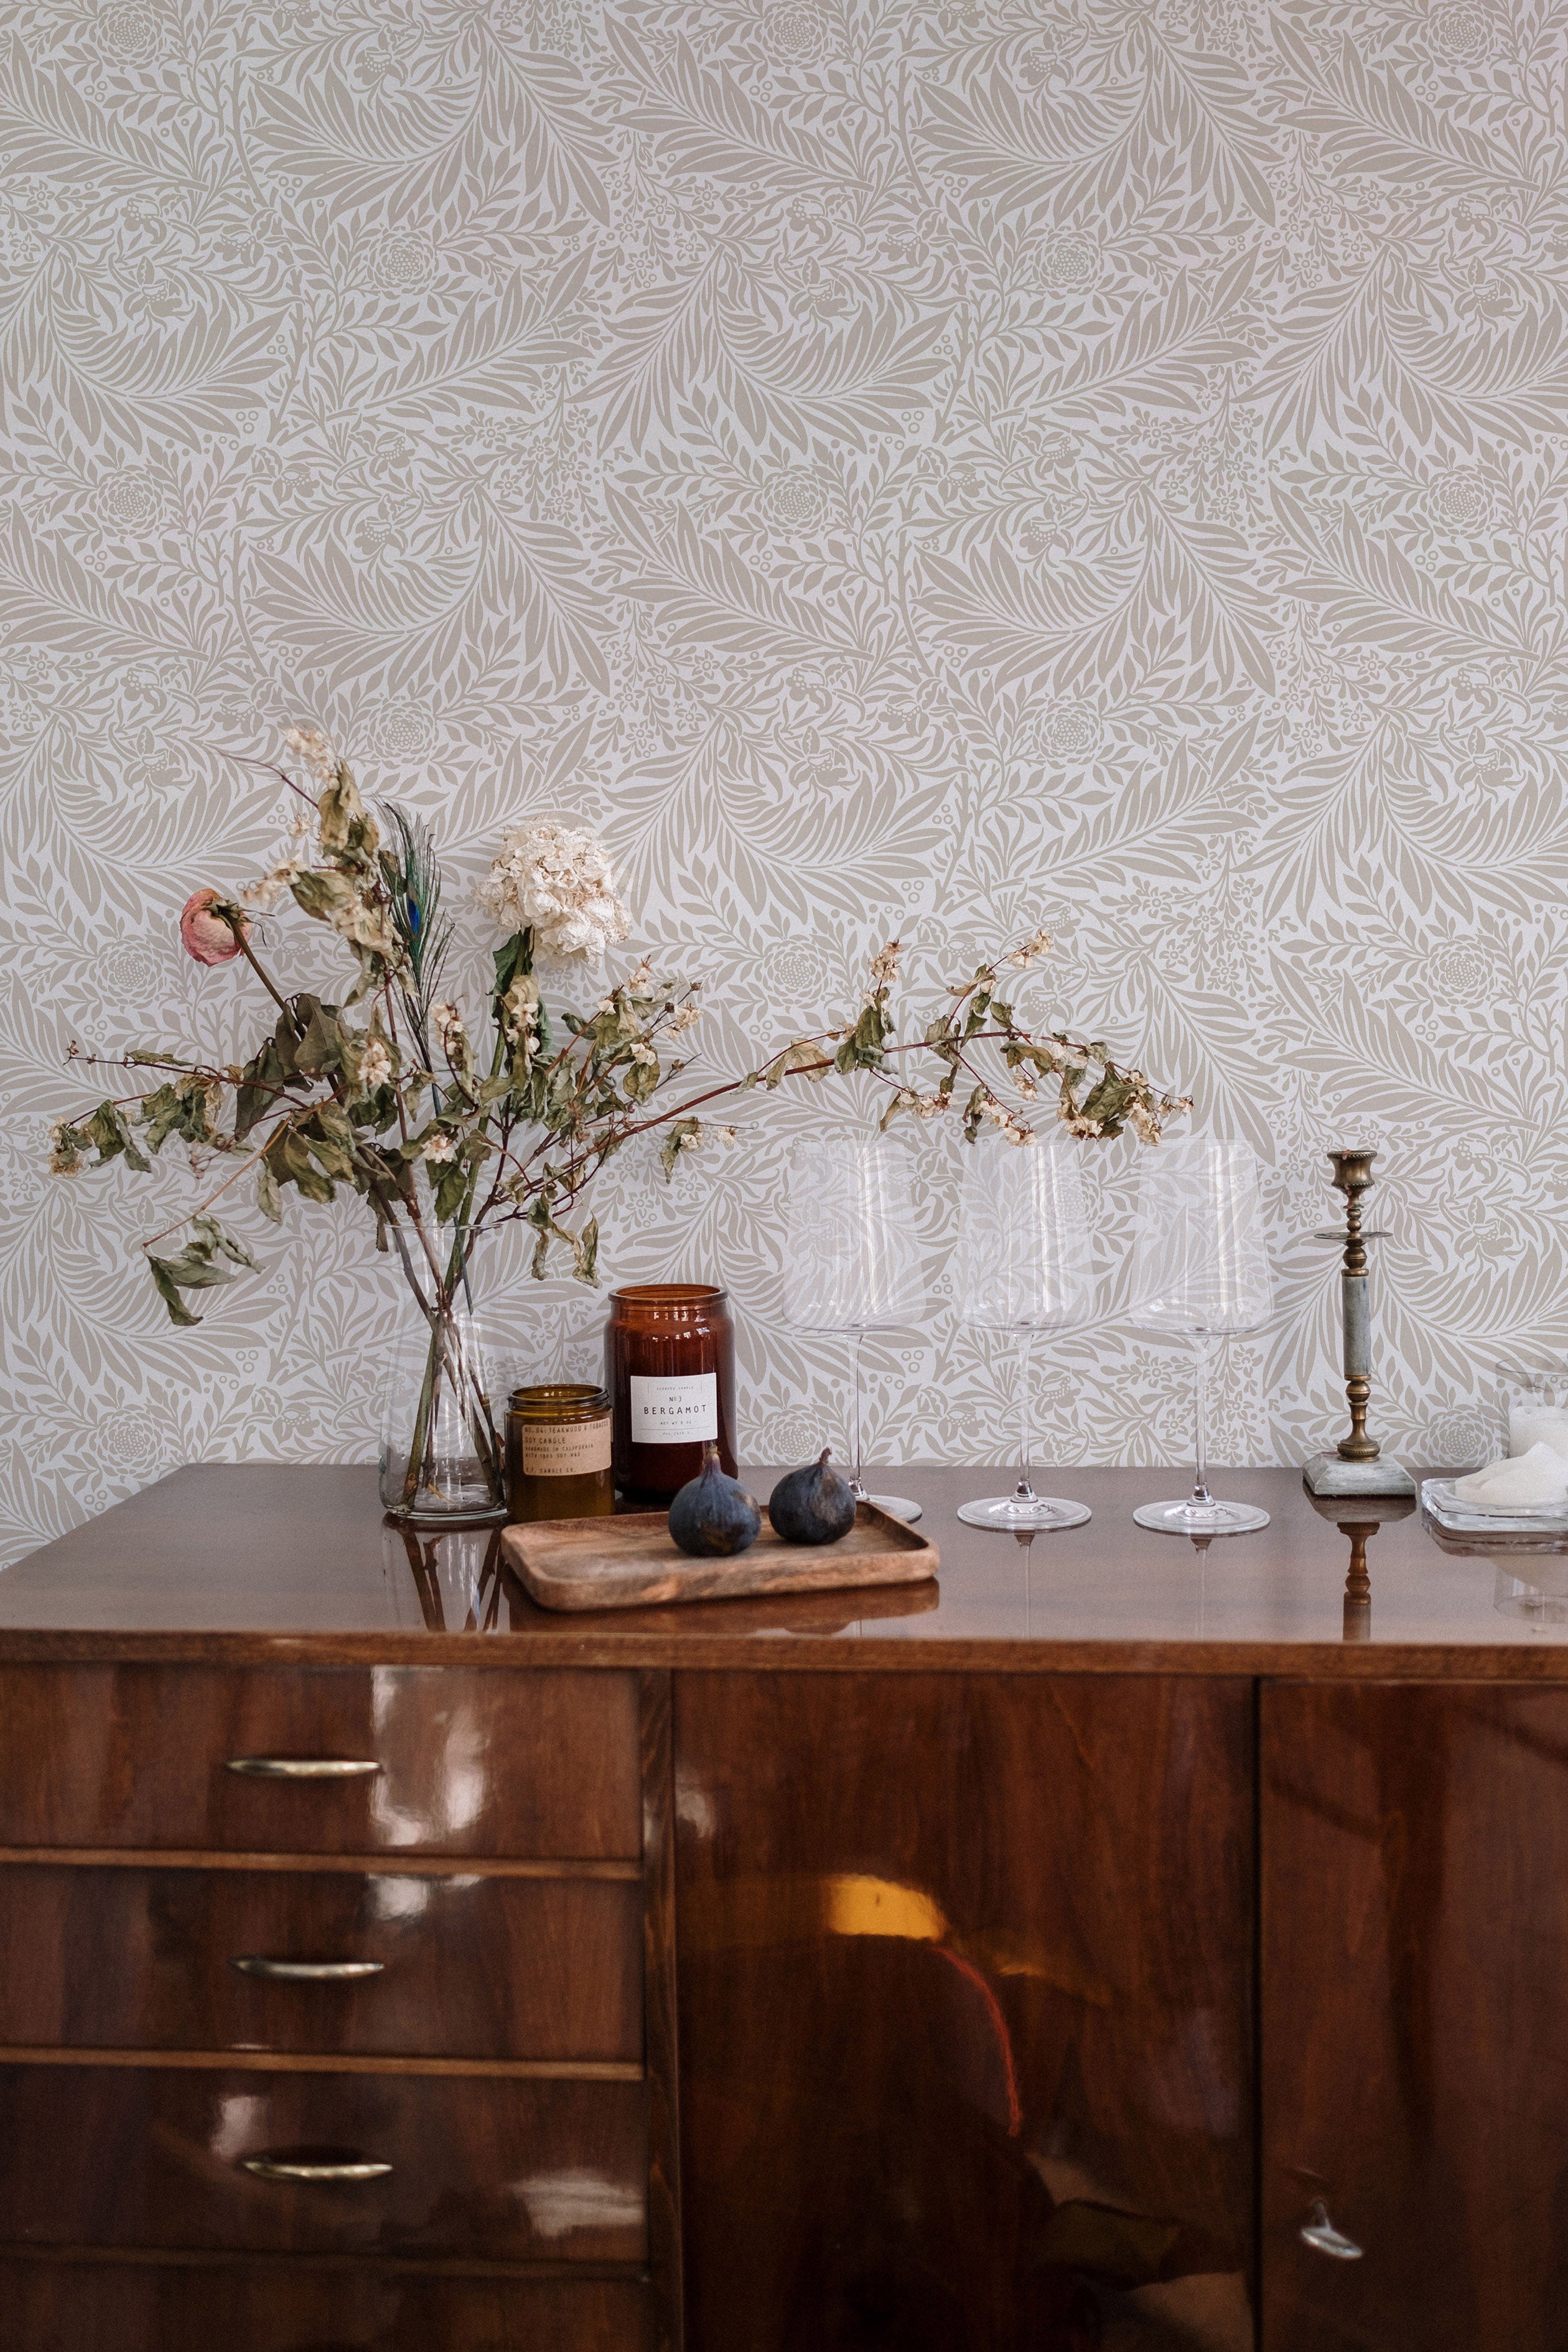 An elegant sideboard against the 'William Bough Wallpaper', decorated with a dried flower arrangement, glassware, and select kitchen items for a rustic-chic look